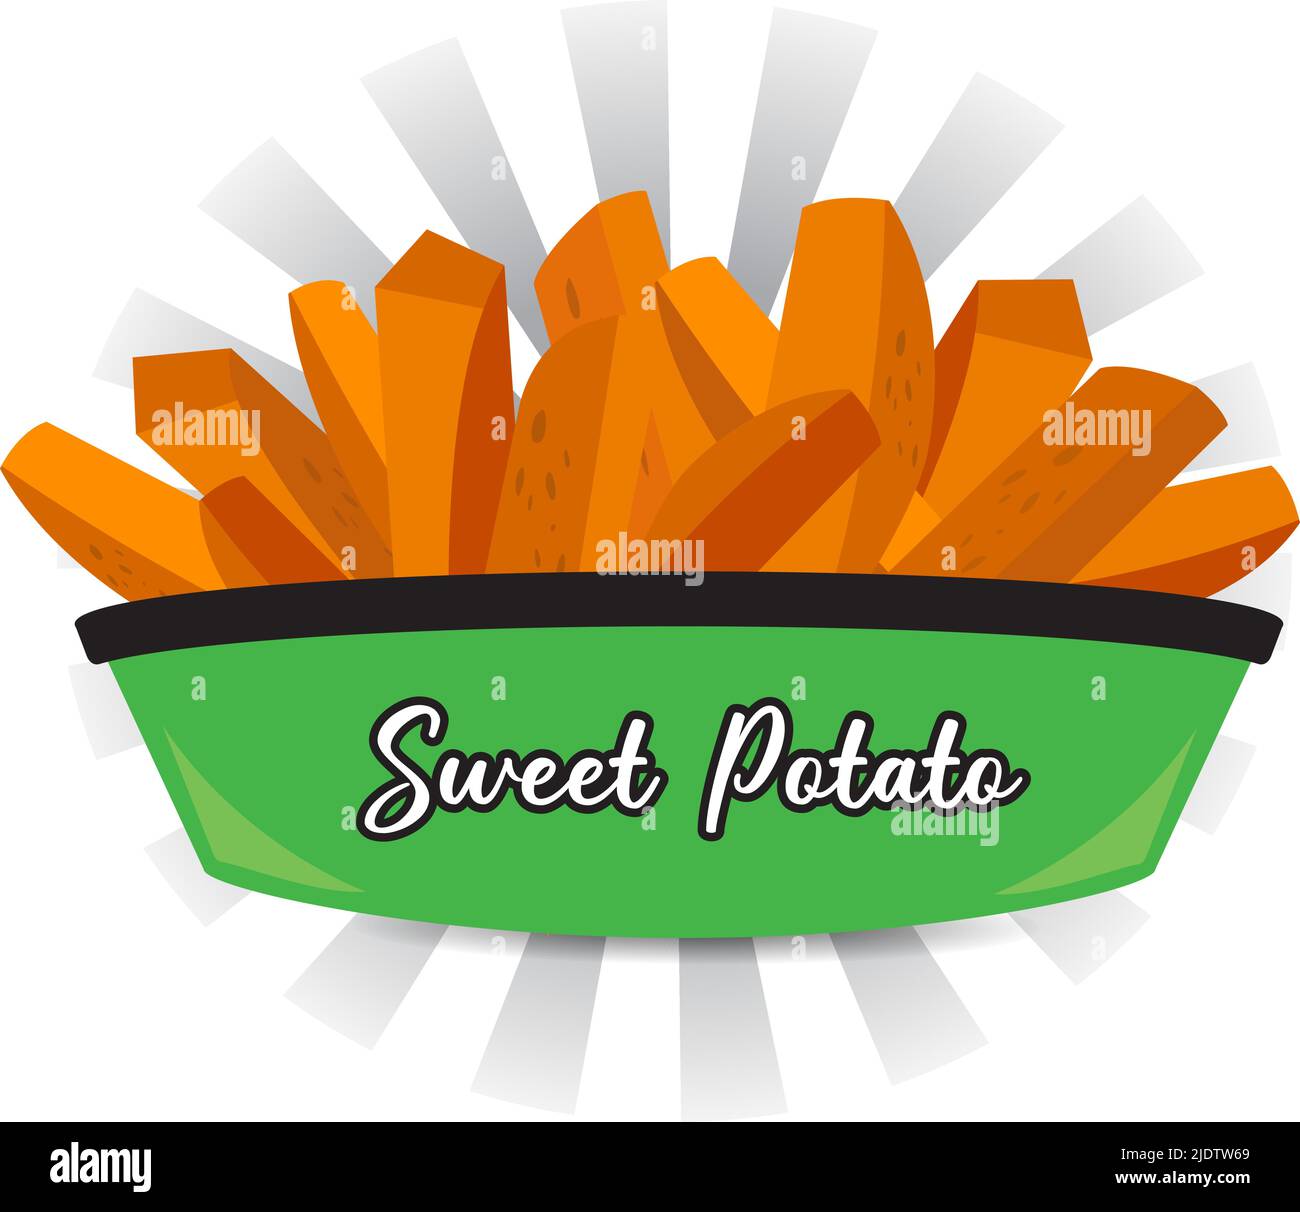 Sweet potato yam wedge fries bowl over rustic wood background food illustration Stock Vector